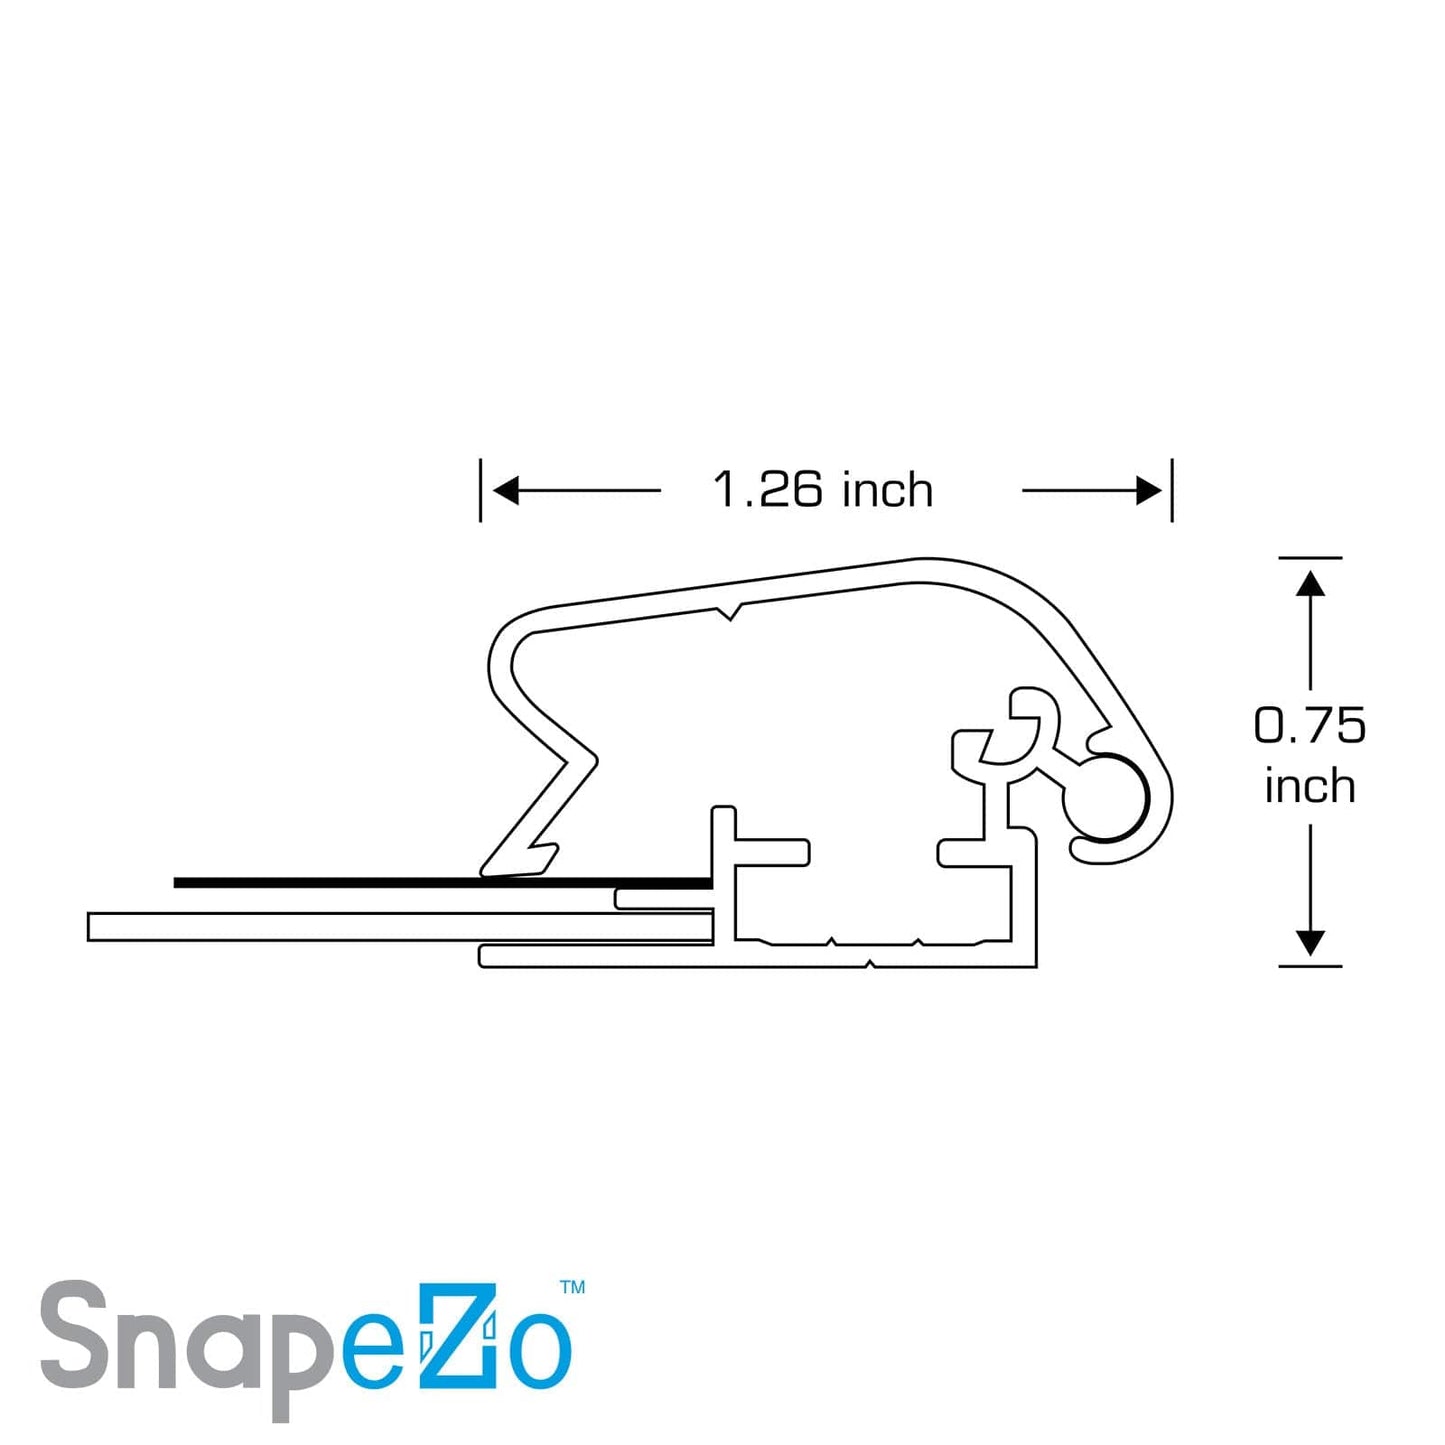 8x10 Gold SnapeZo® Snap Frame - 1.25" Profile - Snap Frames Direct